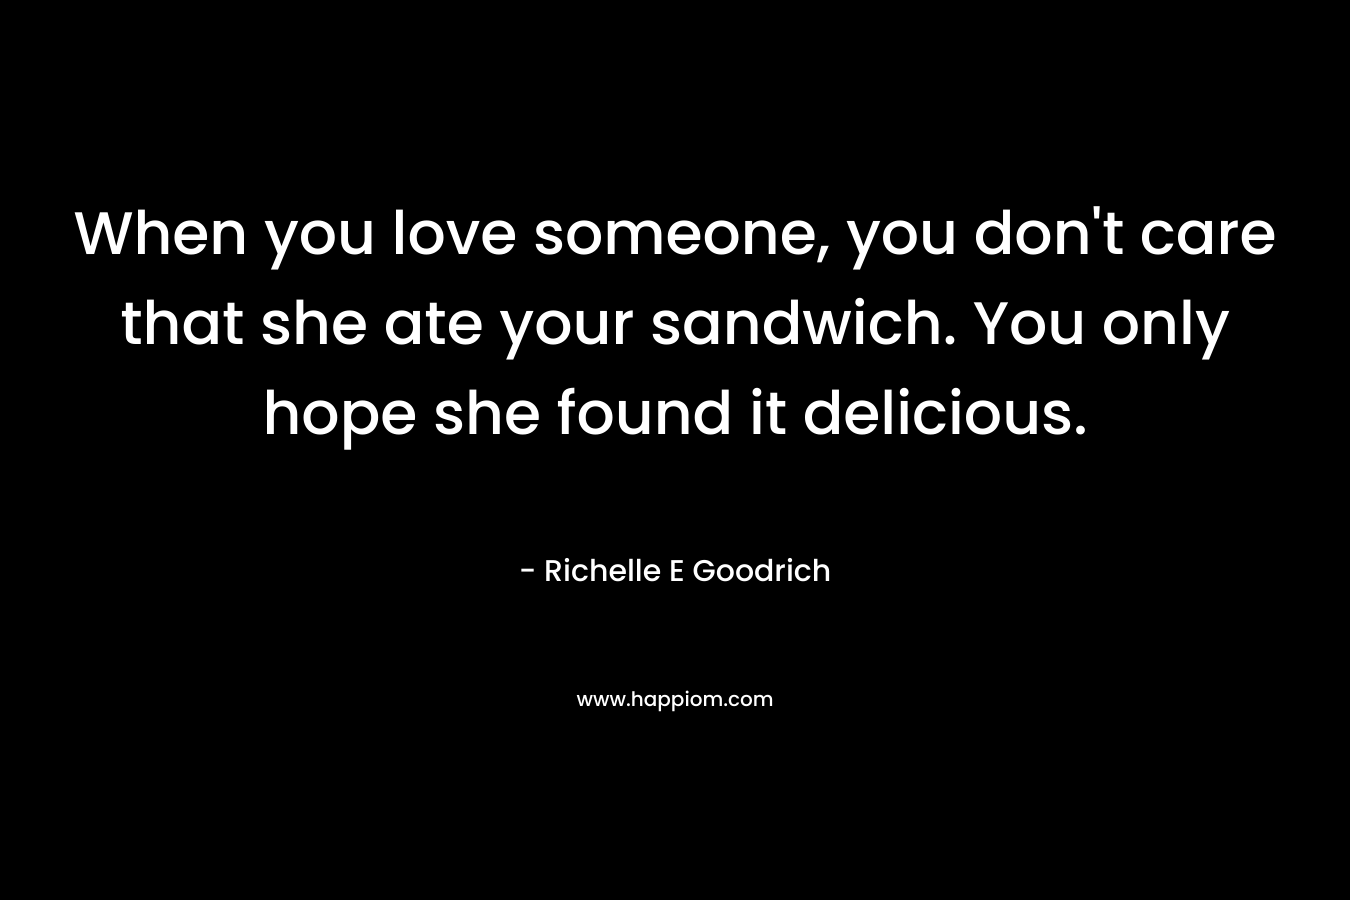 When you love someone, you don’t care that she ate your sandwich. You only hope she found it delicious. – Richelle E Goodrich